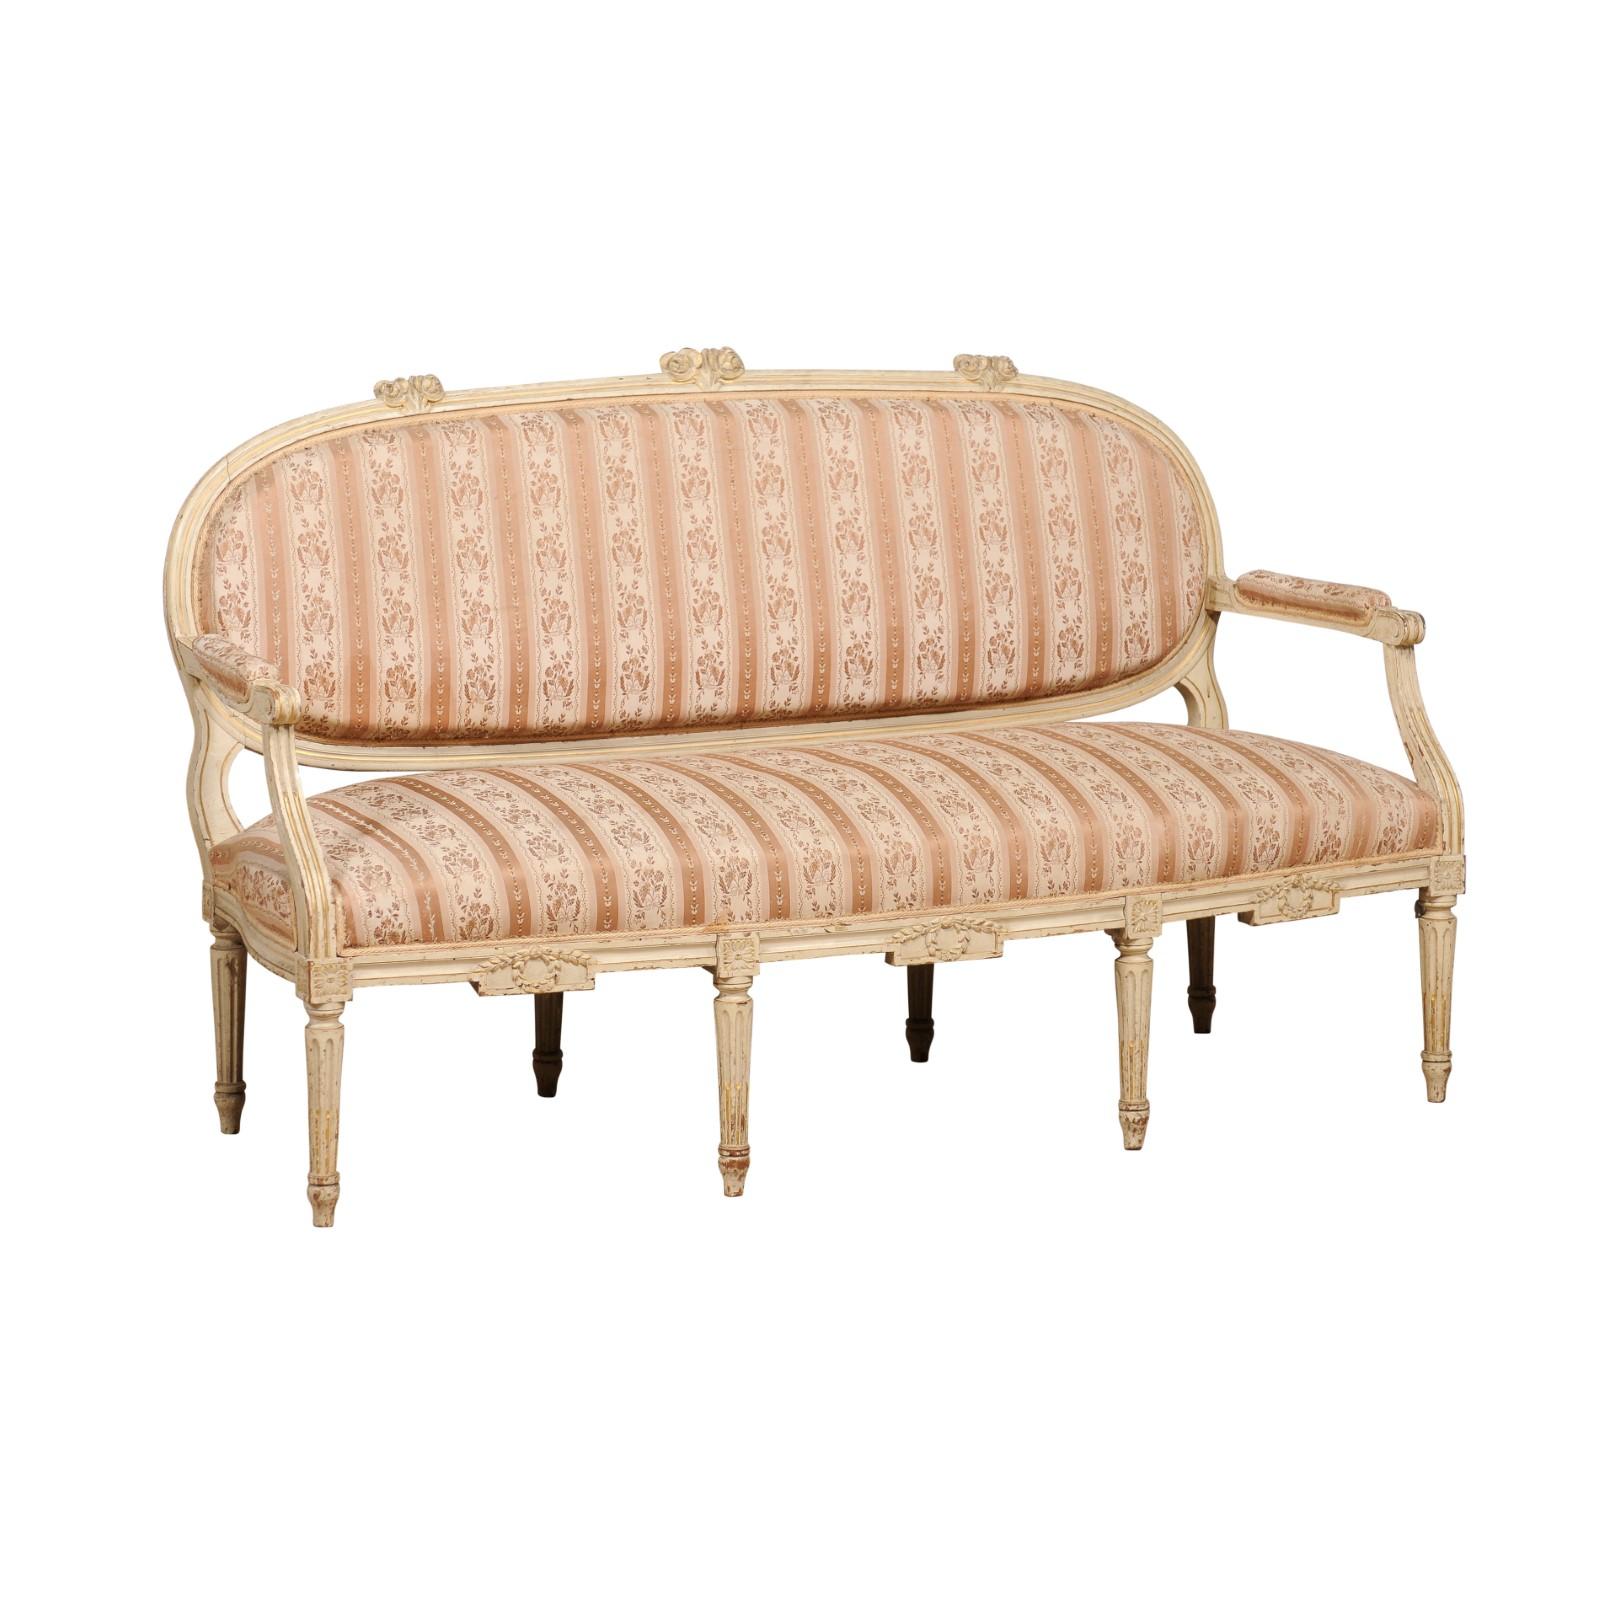 A French Louis XVI period sofa from circa 1790 with antique beige painted finish, oval back, carved foliage and fluted legs. Indulge in the romance of bygone eras with this exquisite French Louis XVI period sofa, circa 1790. Showcasing an antique